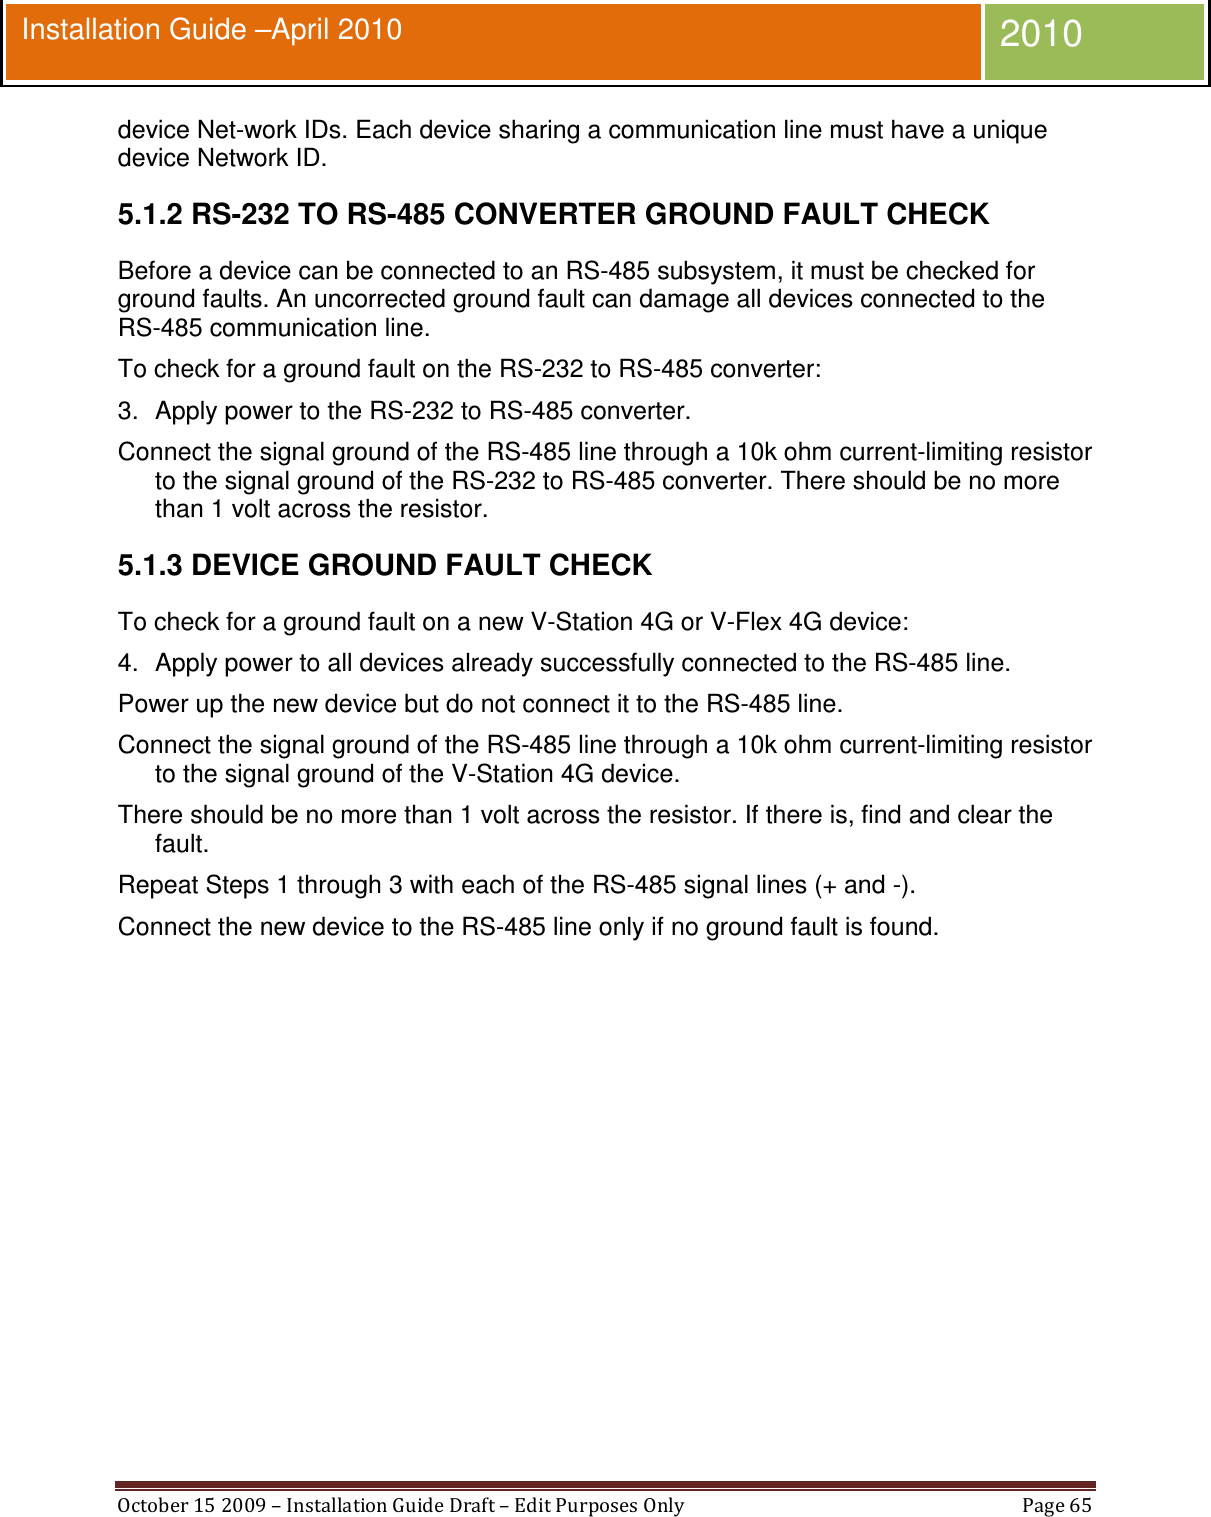  October 15 2009 – Installation Guide Draft – Edit Purposes Only  Page 65  Installation Guide –April 2010 2010 device Net-work IDs. Each device sharing a communication line must have a unique device Network ID. 5.1.2 RS-232 TO RS-485 CONVERTER GROUND FAULT CHECK Before a device can be connected to an RS-485 subsystem, it must be checked for ground faults. An uncorrected ground fault can damage all devices connected to the RS-485 communication line. To check for a ground fault on the RS-232 to RS-485 converter: 3.  Apply power to the RS-232 to RS-485 converter. Connect the signal ground of the RS-485 line through a 10k ohm current-limiting resistor to the signal ground of the RS-232 to RS-485 converter. There should be no more than 1 volt across the resistor. 5.1.3 DEVICE GROUND FAULT CHECK To check for a ground fault on a new V-Station 4G or V-Flex 4G device: 4.  Apply power to all devices already successfully connected to the RS-485 line. Power up the new device but do not connect it to the RS-485 line. Connect the signal ground of the RS-485 line through a 10k ohm current-limiting resistor to the signal ground of the V-Station 4G device. There should be no more than 1 volt across the resistor. If there is, find and clear the fault. Repeat Steps 1 through 3 with each of the RS-485 signal lines (+ and -). Connect the new device to the RS-485 line only if no ground fault is found.   